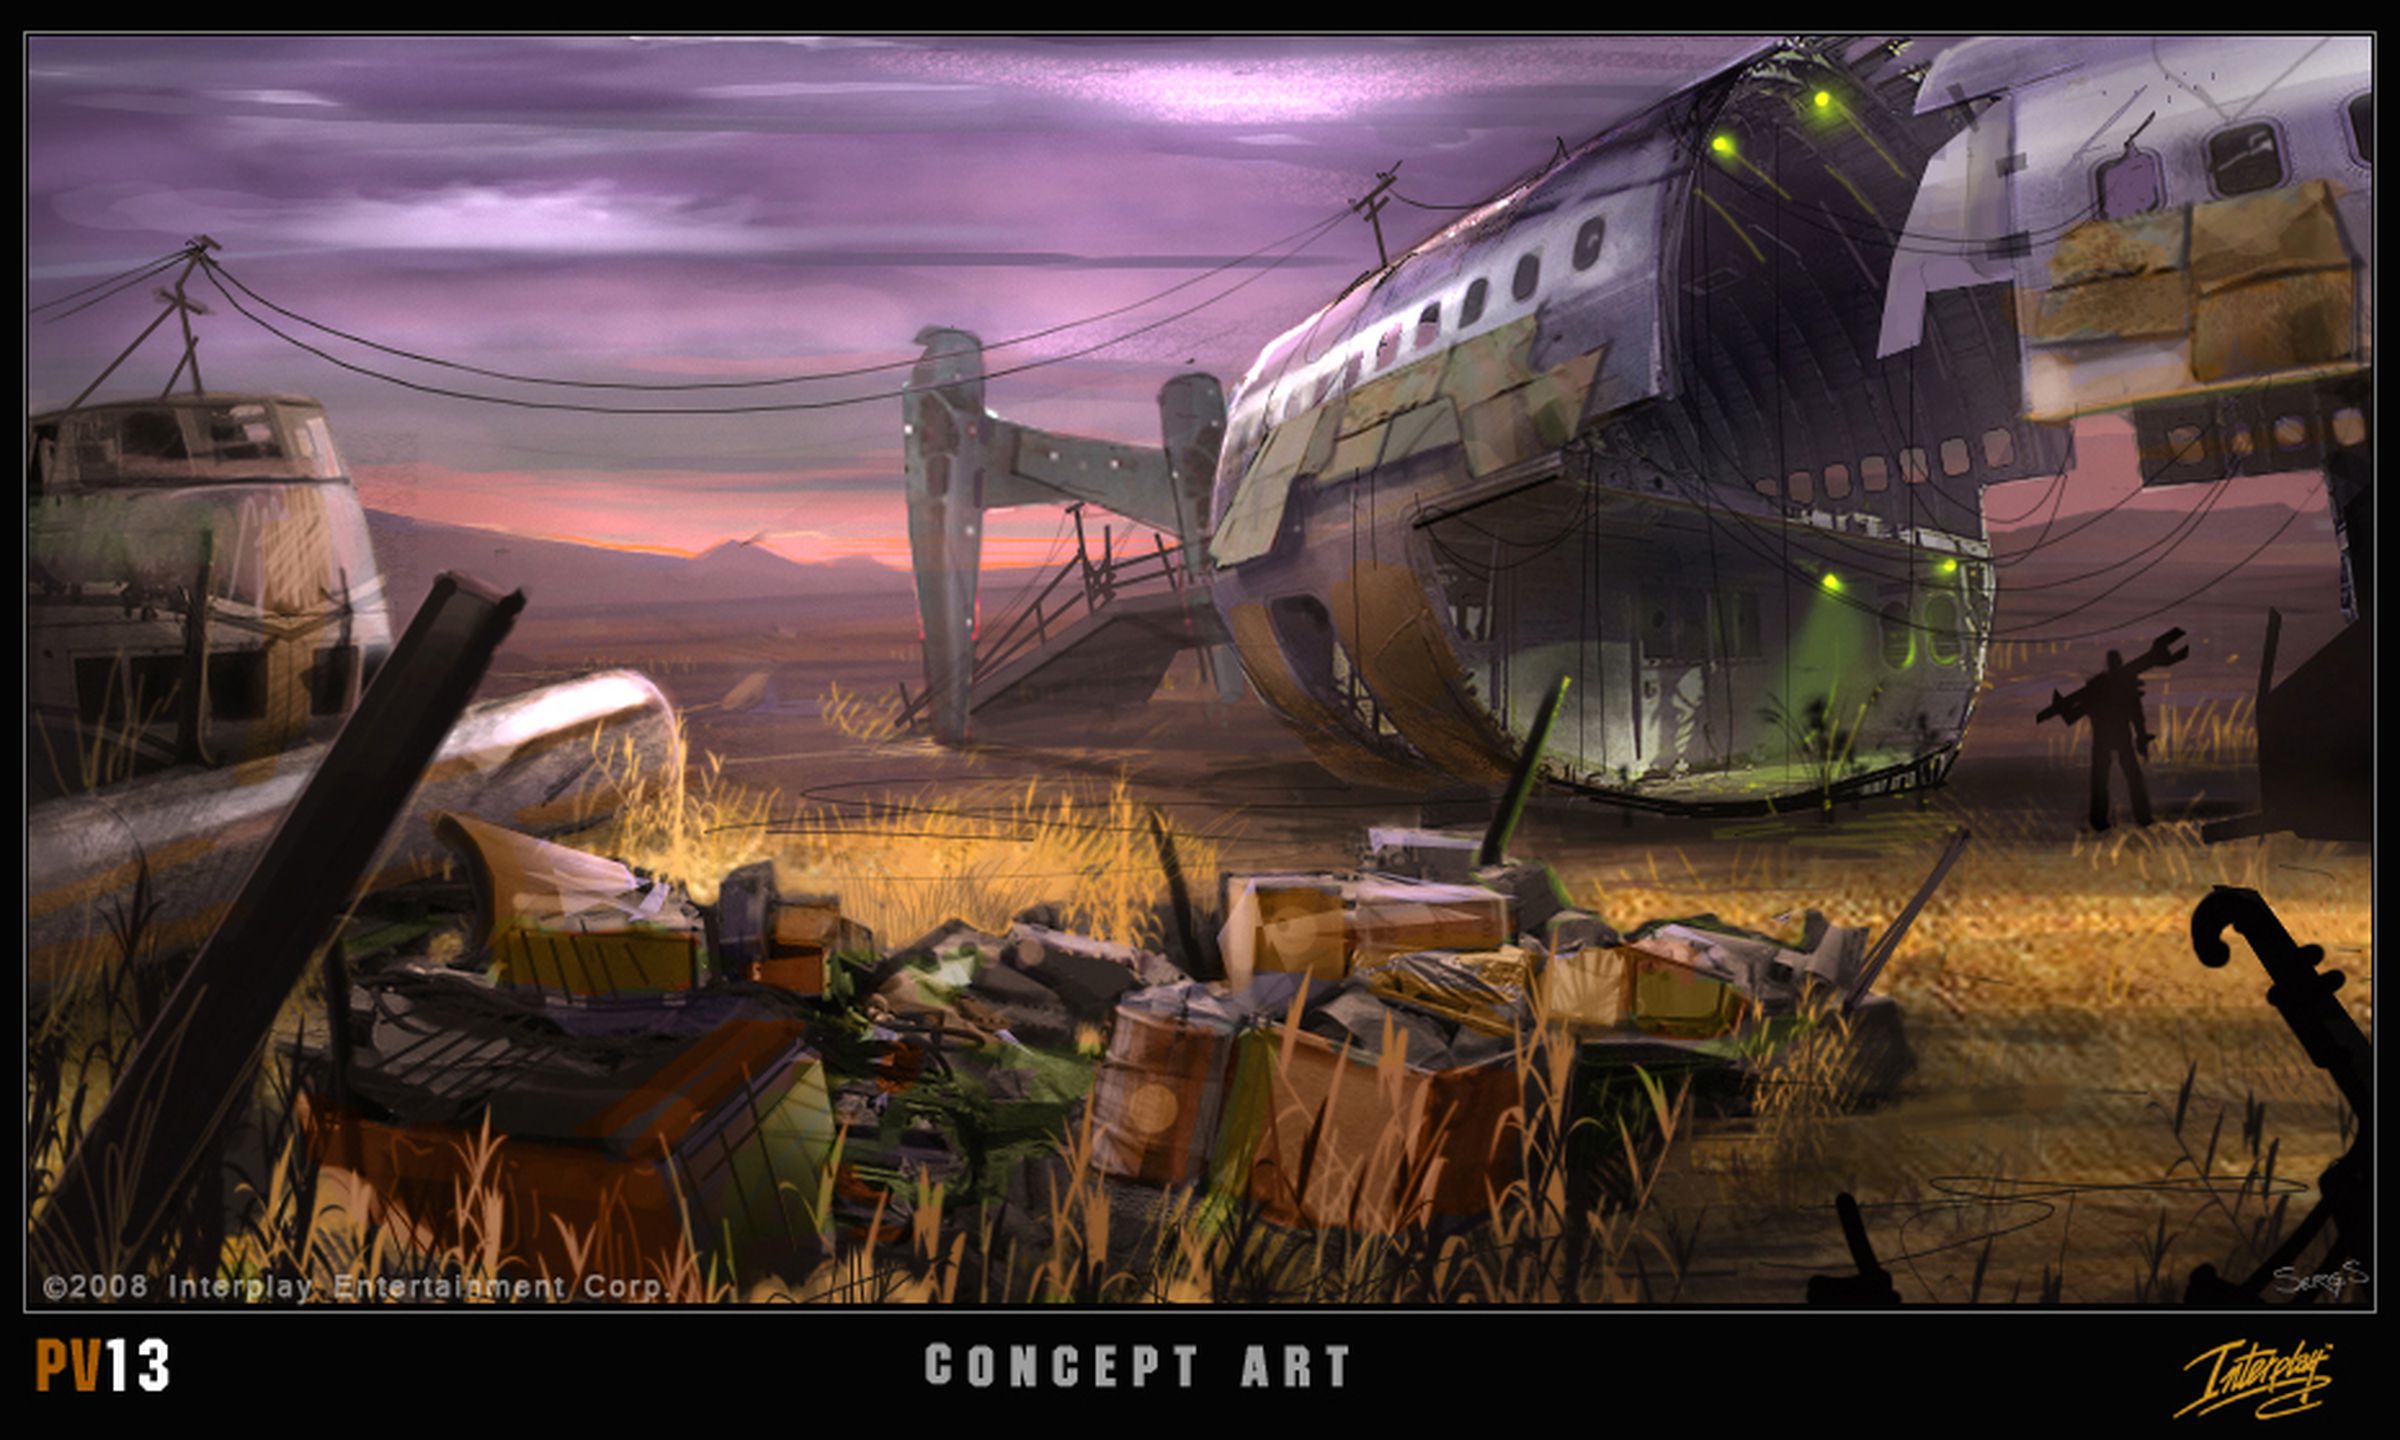 Fallout Project V13 concept art, airplane